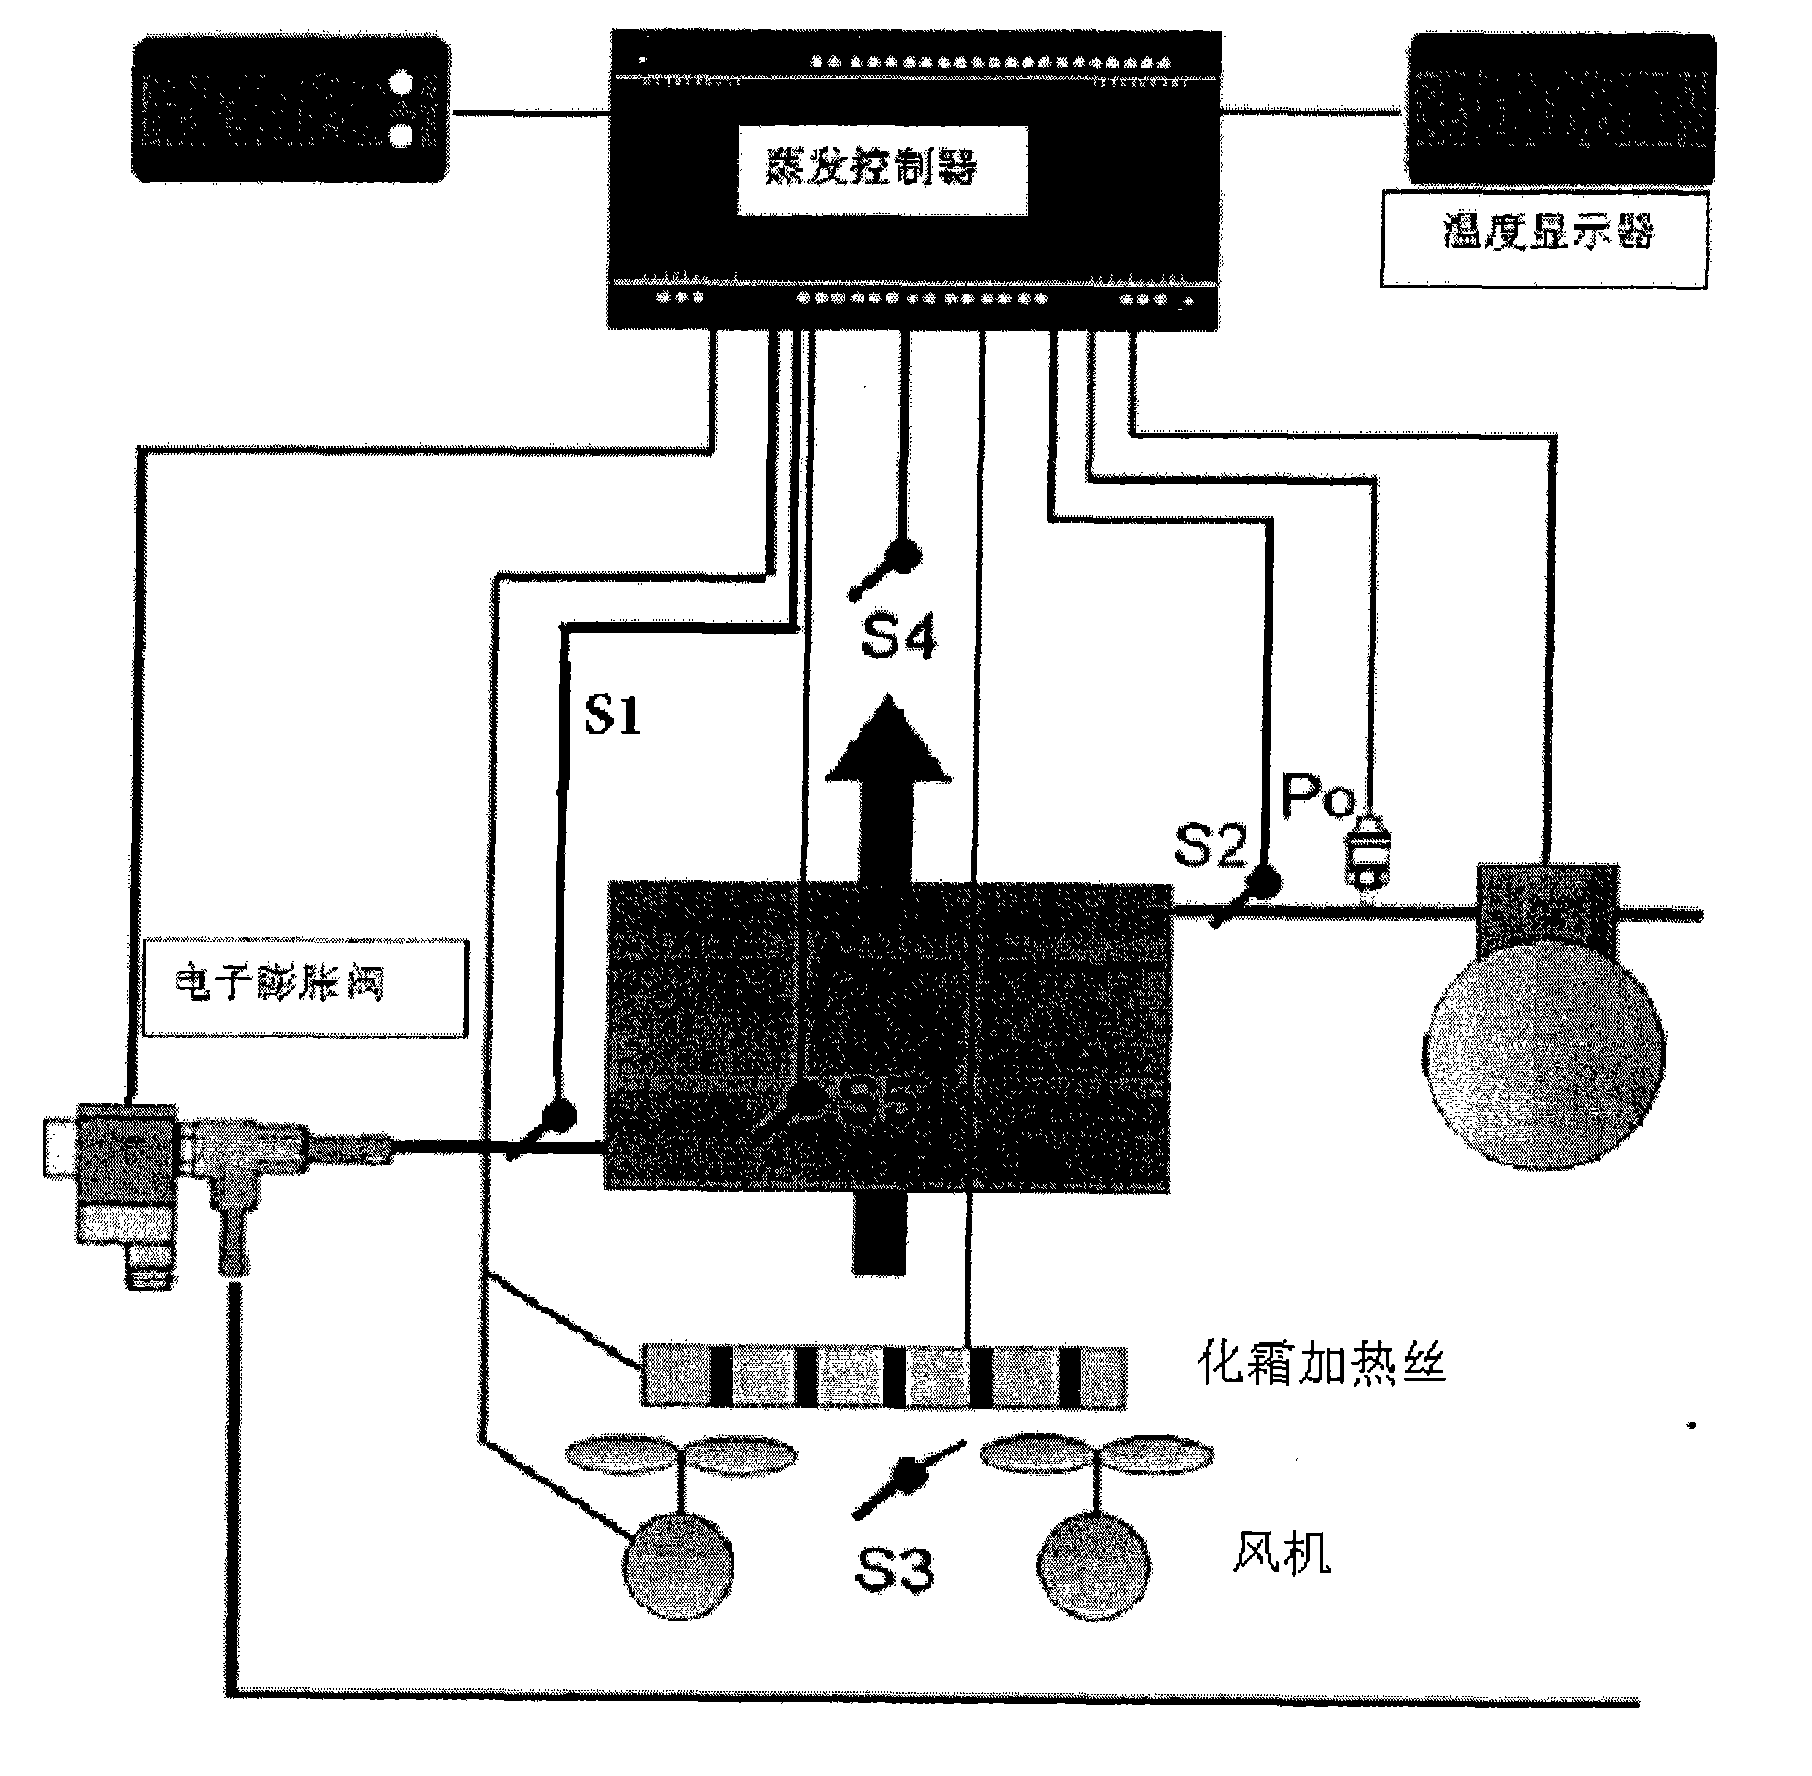 Evaporation control device used in refrigerating system